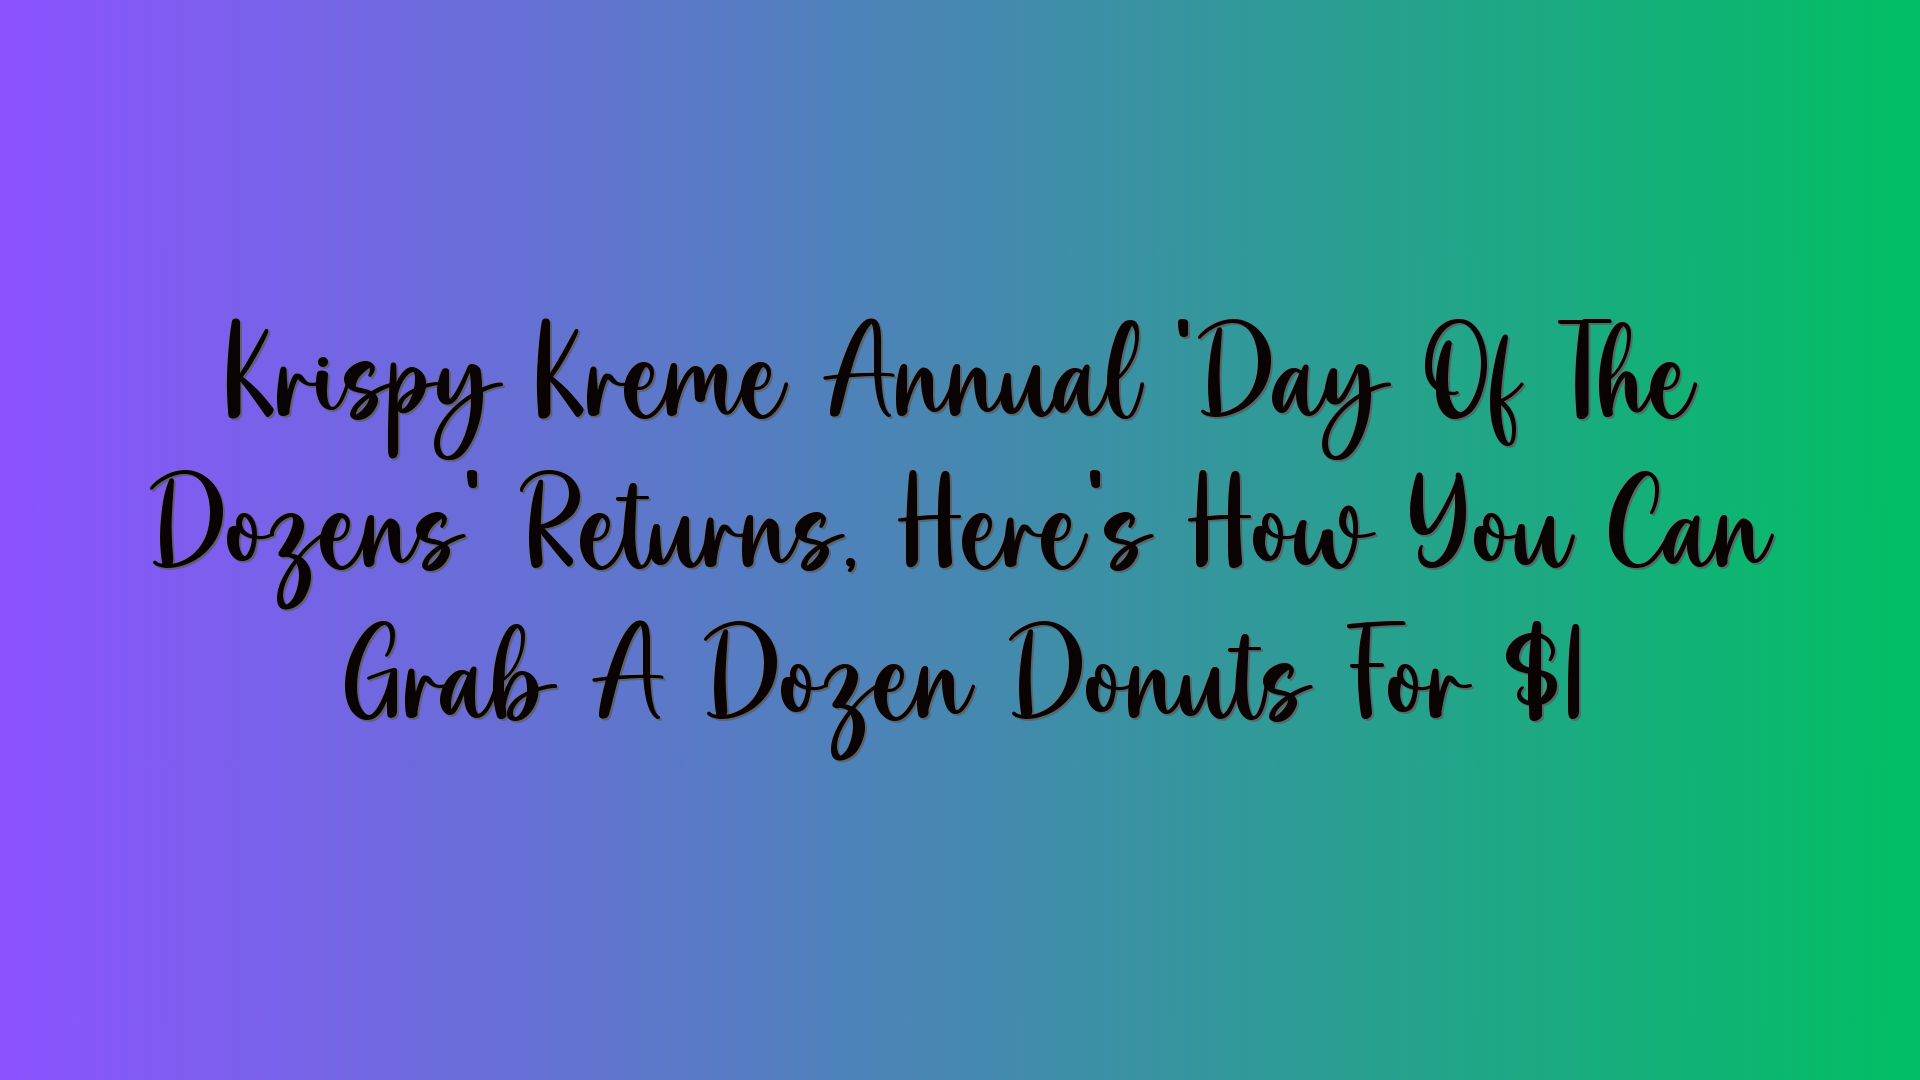 Krispy Kreme Annual ‘Day Of The Dozens’ Returns, Here’s How You Can Grab A Dozen Donuts For $1